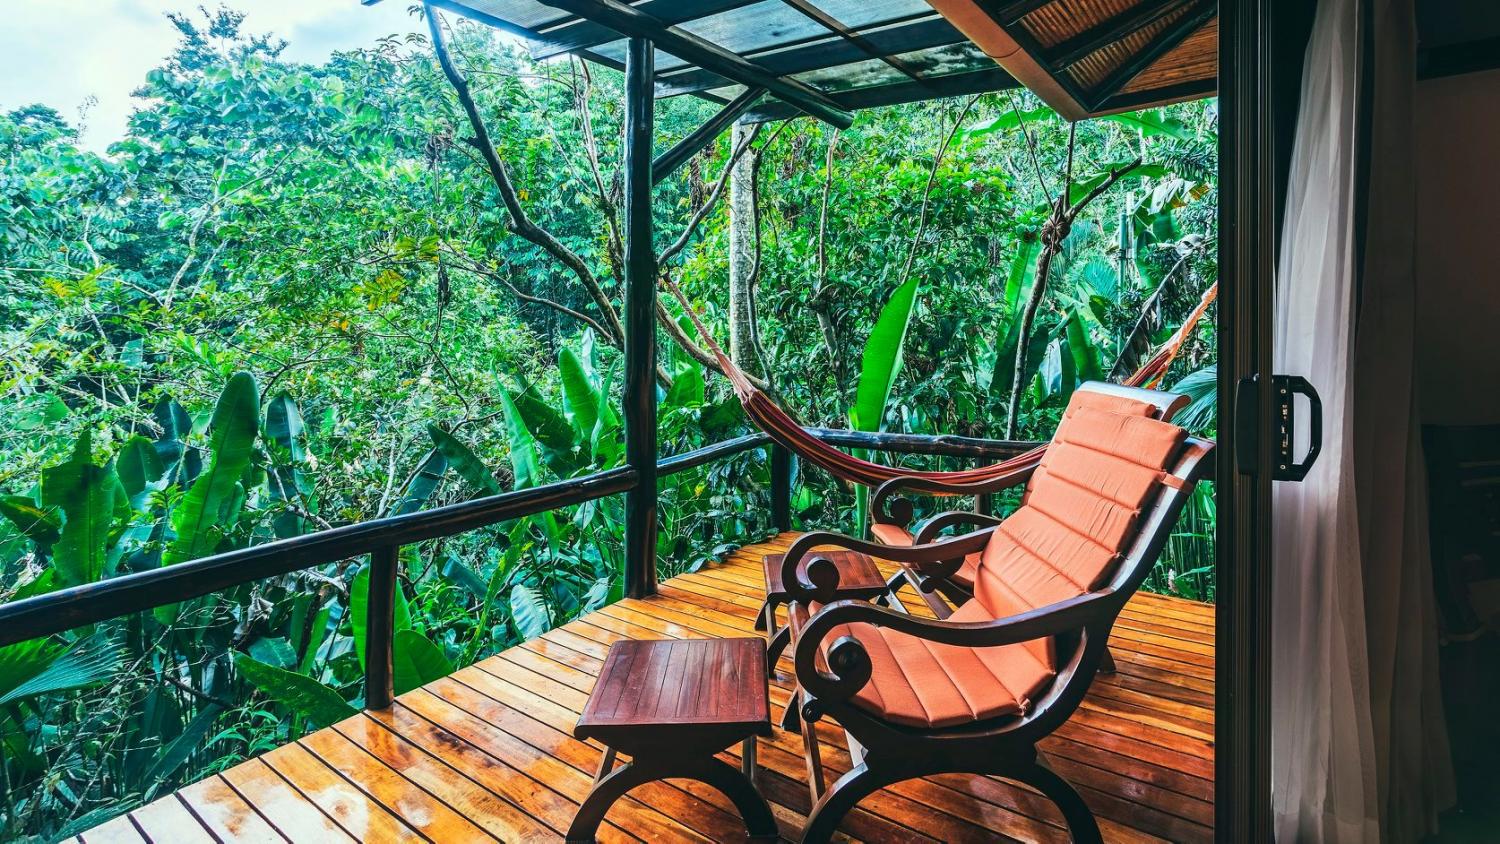 Luxury Costa Rican Villa That Lets You Sleep In The Rainforest and Hang Out With Sloths - Sloth rainforest villa